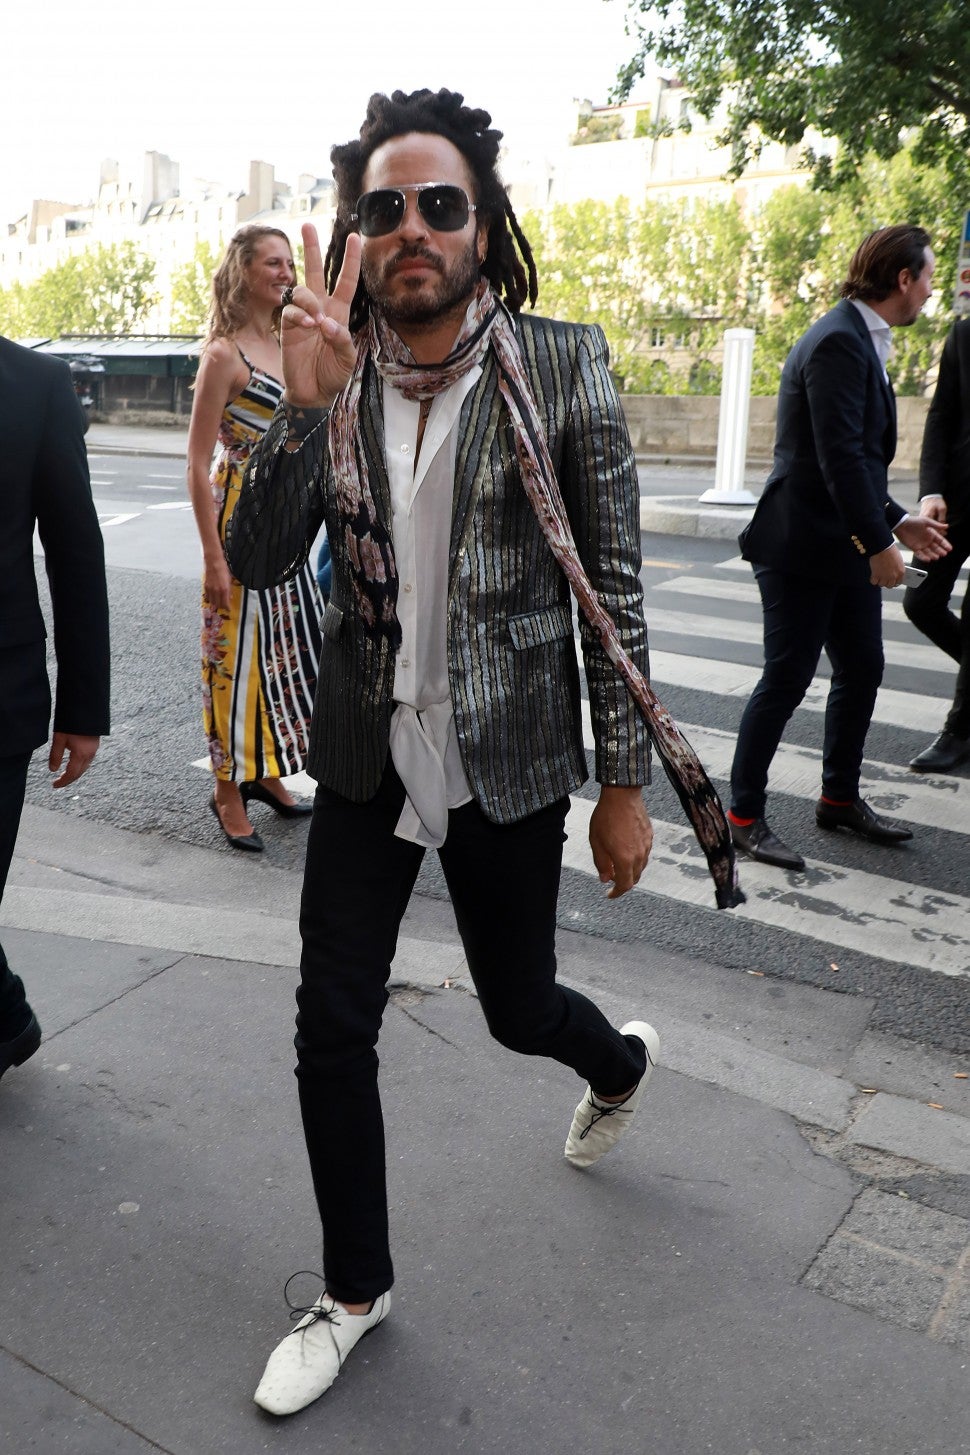 Lenny Kravitz arrives at a dinner at 'La Perouse' restaurant where a dinner is given to celebrate Zoe Kravitz and Karl Glusman's wedding on June 28, 2019 in Paris, France.